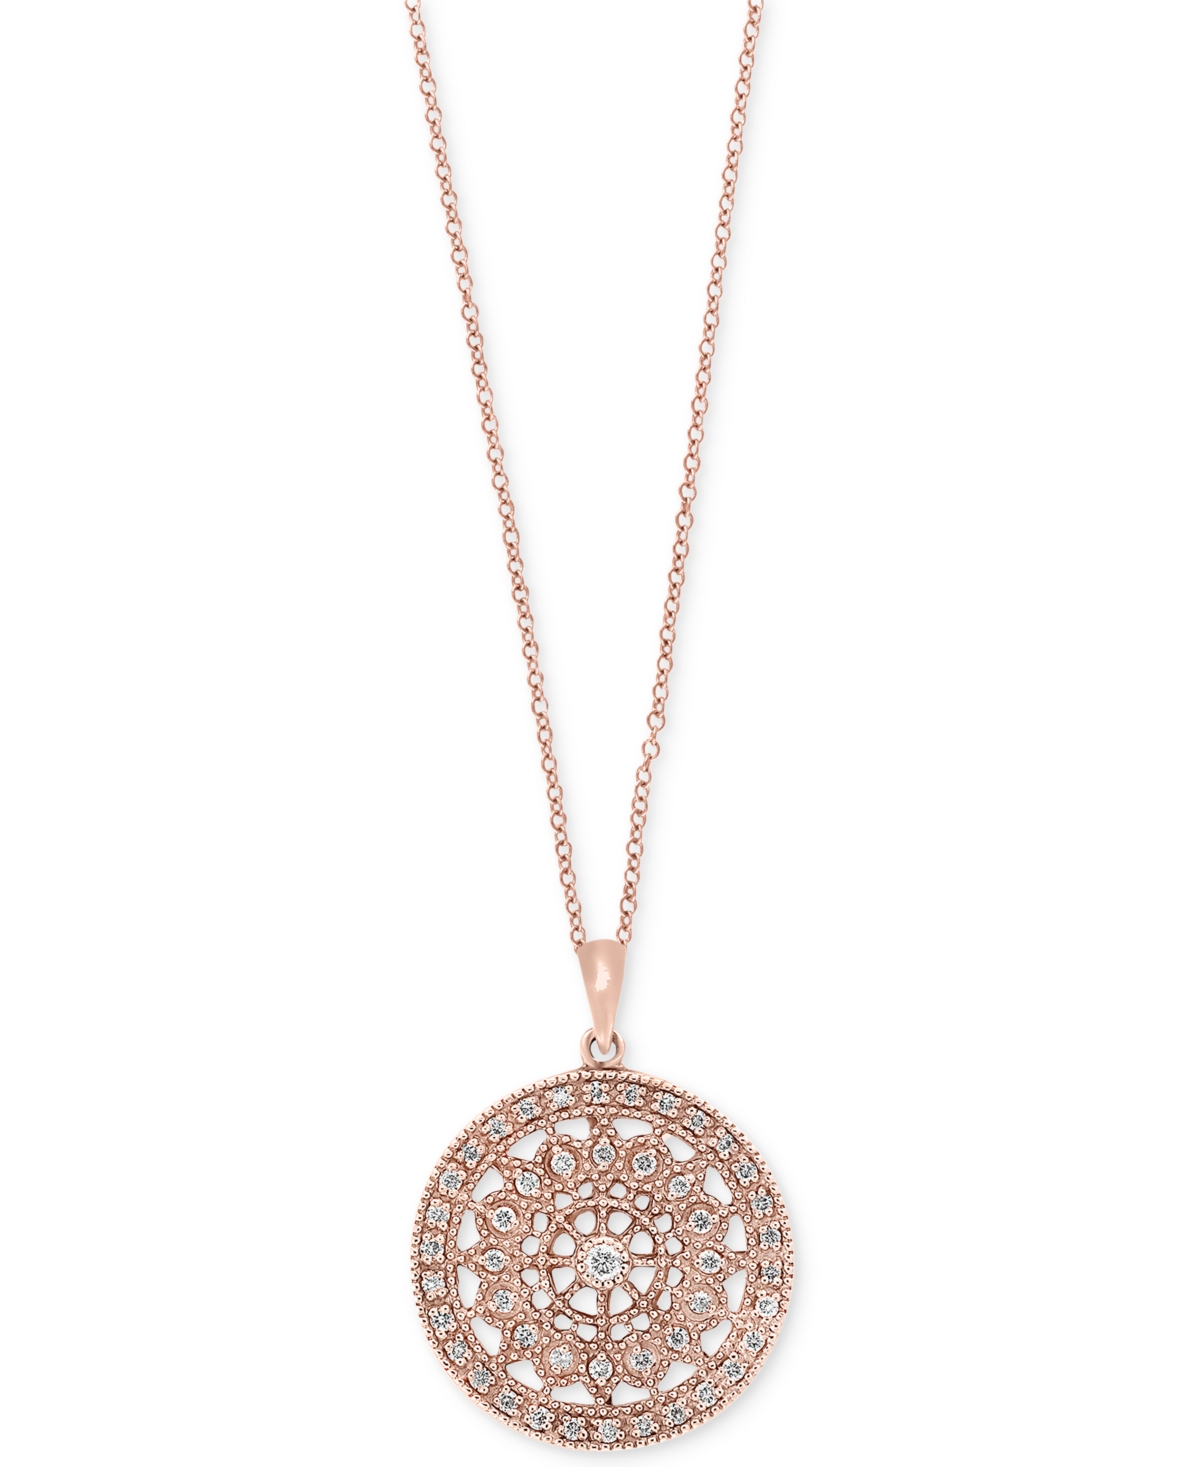 Effy Collection Effy Diamond Disc Pendant Necklace (1/4 ct. t.w.) in 14k White, Rose, or Yellow Gold